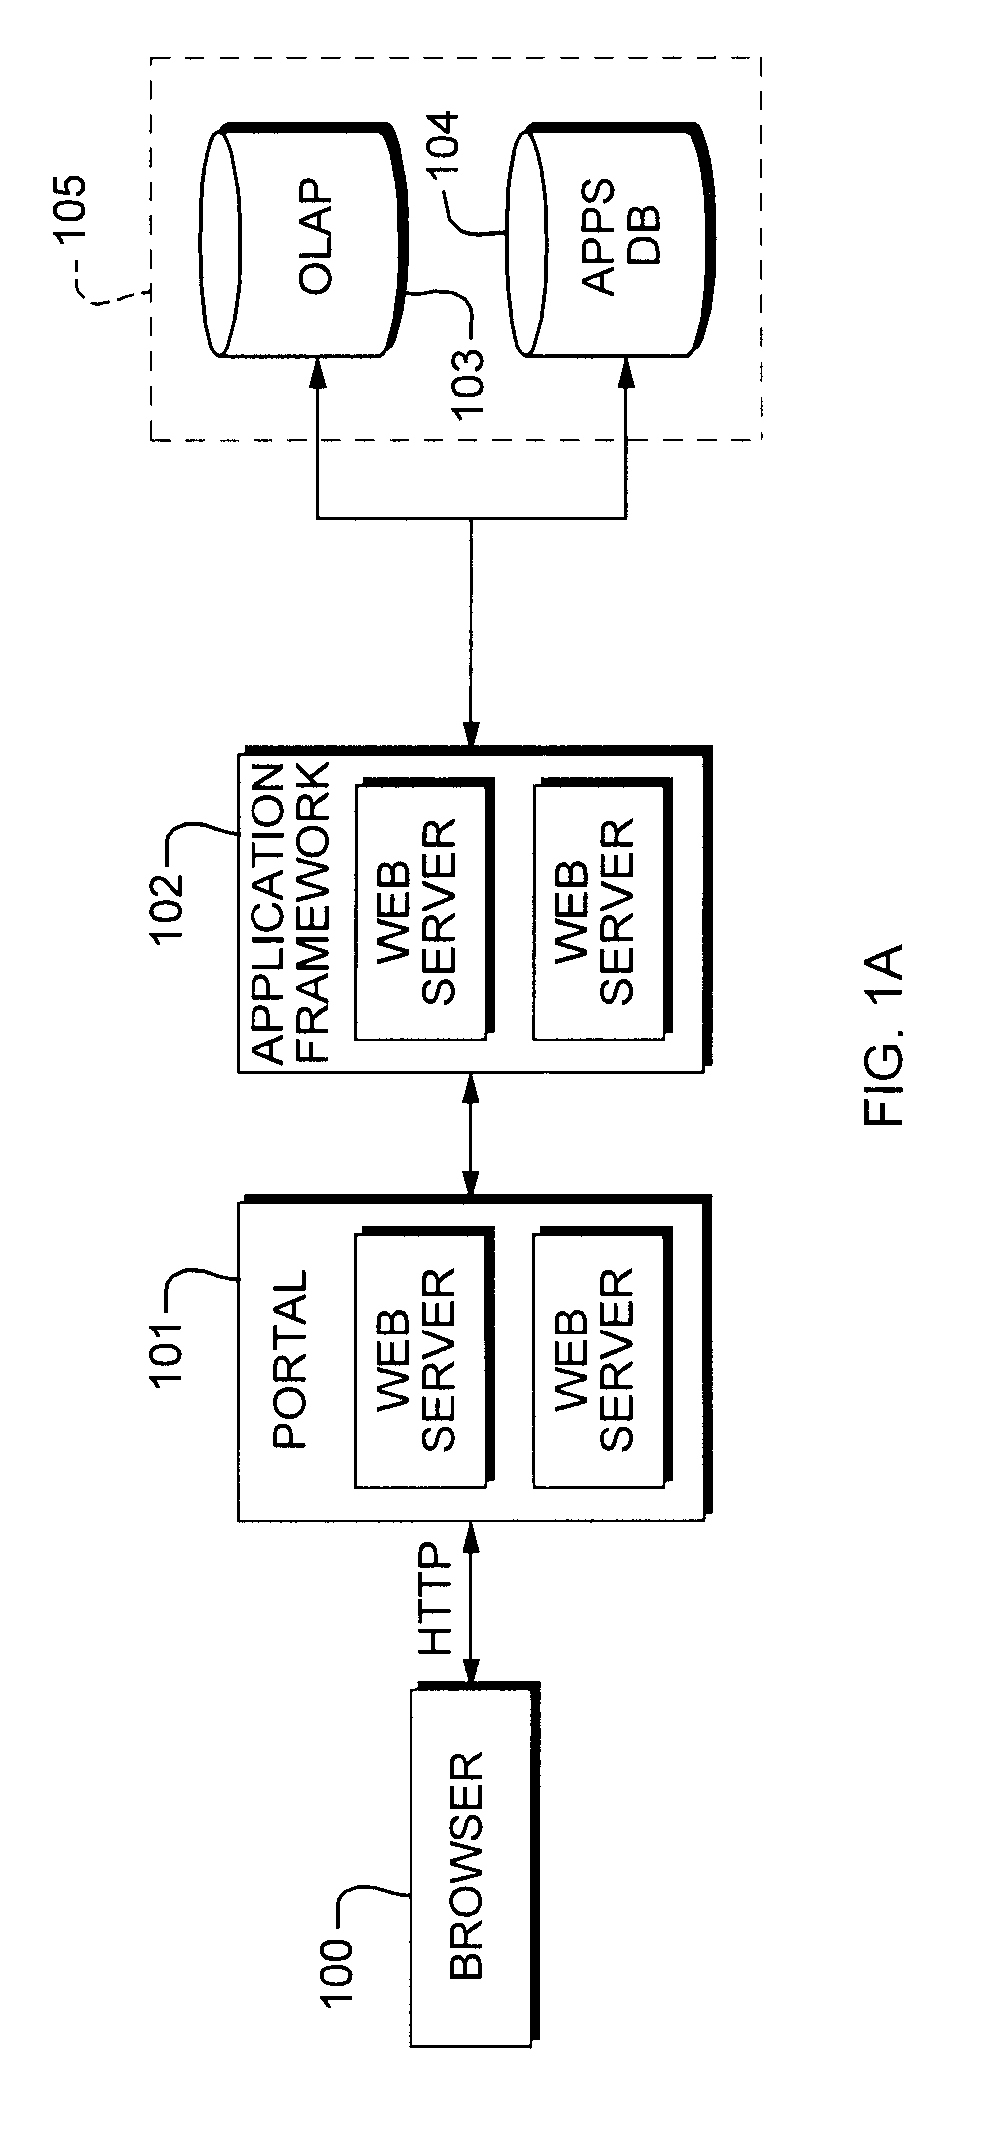 Method and system for implementing portal